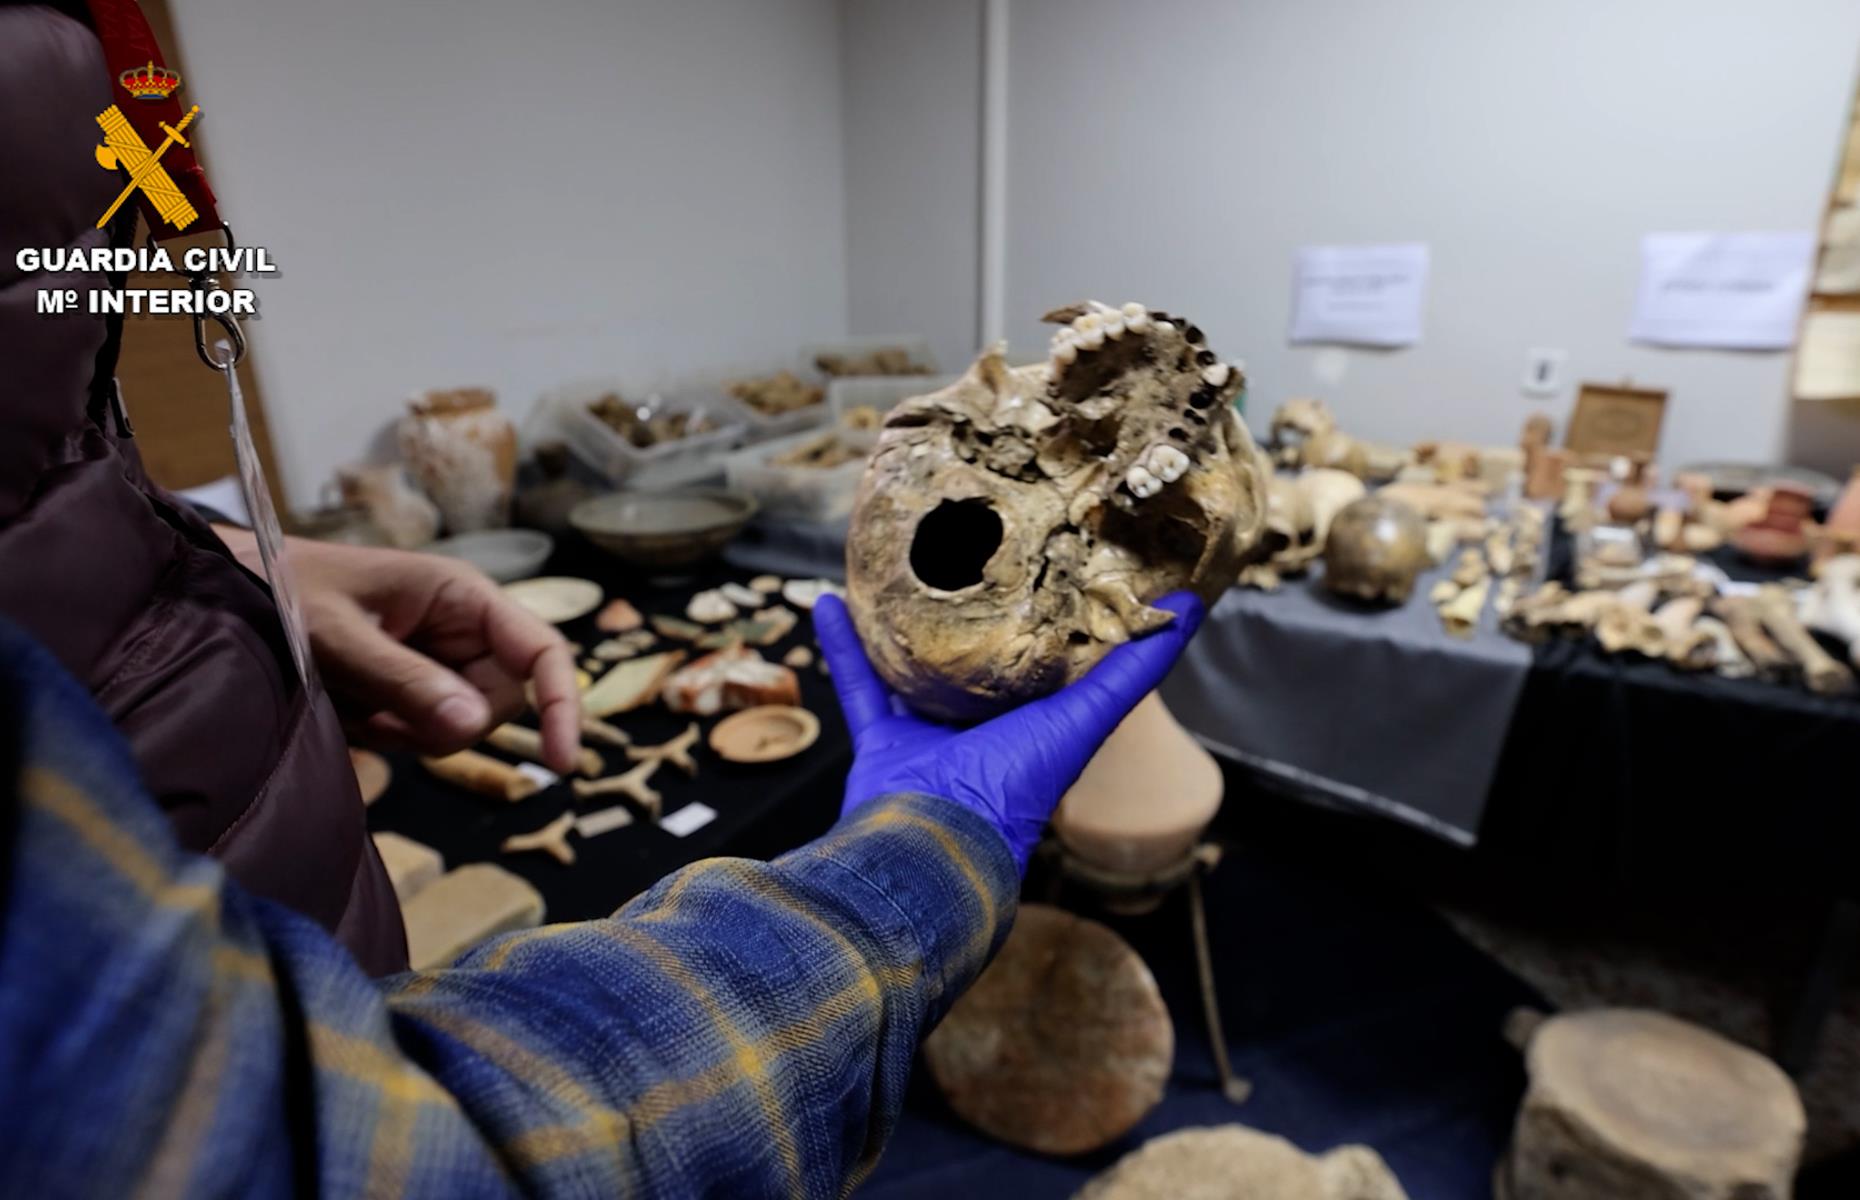 <p>At the end of 2022, after receiving a tipoff concerning skeletal remains, Spanish police raided two homes in the Alicante province. What they found was astonishing: a (probably illegal) treasure trove of <a href="https://www.theguardian.com/world/2023/jan/02/spanish-police-find-hundreds-of-archaeological-artefacts-at-two-homes">350 ancient artefacts</a>, ranging from 5,000-year-old bone fragments to Phoenican pottery. They're currently in a local archaeological museum while the investigation is underway. One of the suspects claimed the items were inherited from a deceased relative, who kept intriguing journals that pinpoint where the items were dug up. These handwritten notes could lead to the discovery of as-yet-unknown ancient sites in Alicante...</p>